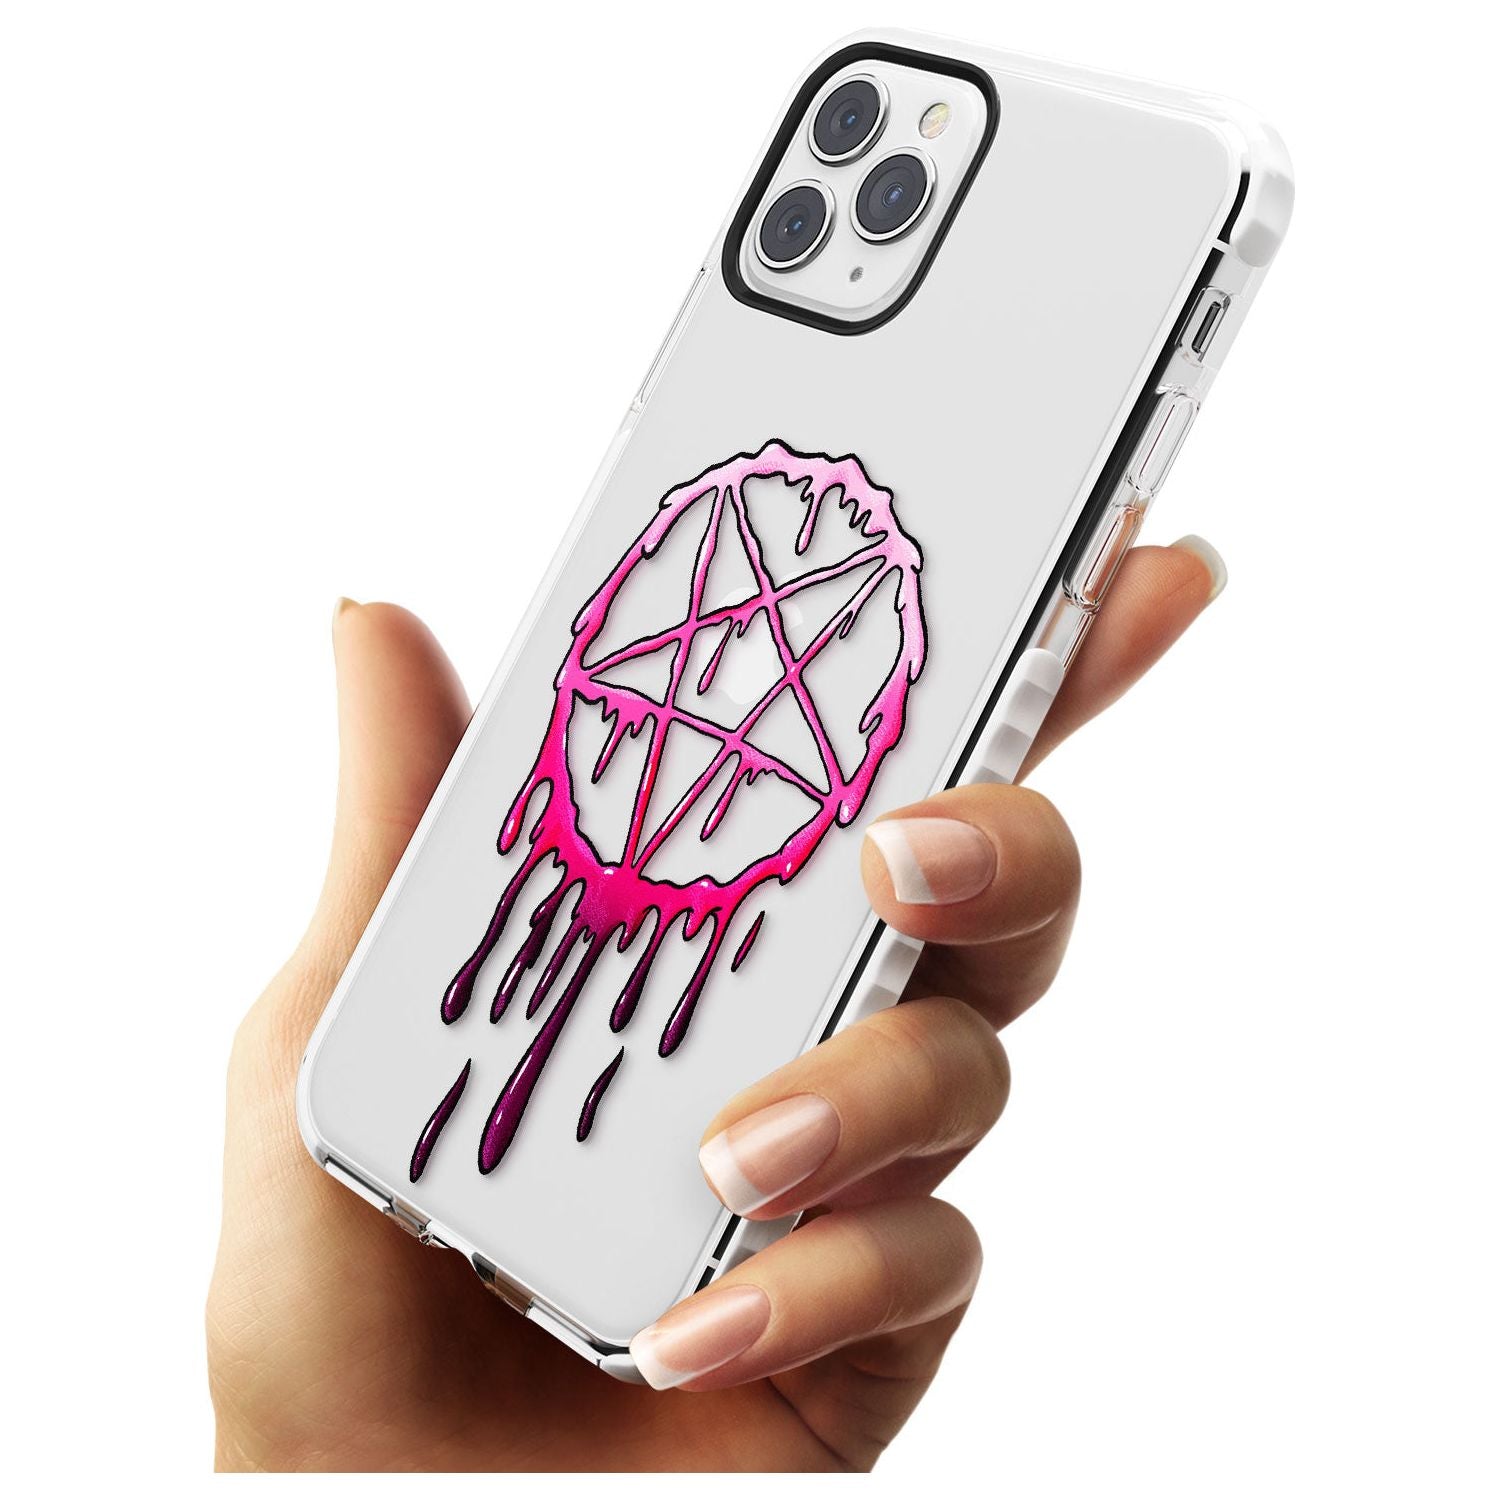 Pentagram of Blood Impact Phone Case for iPhone 11 Pro Max